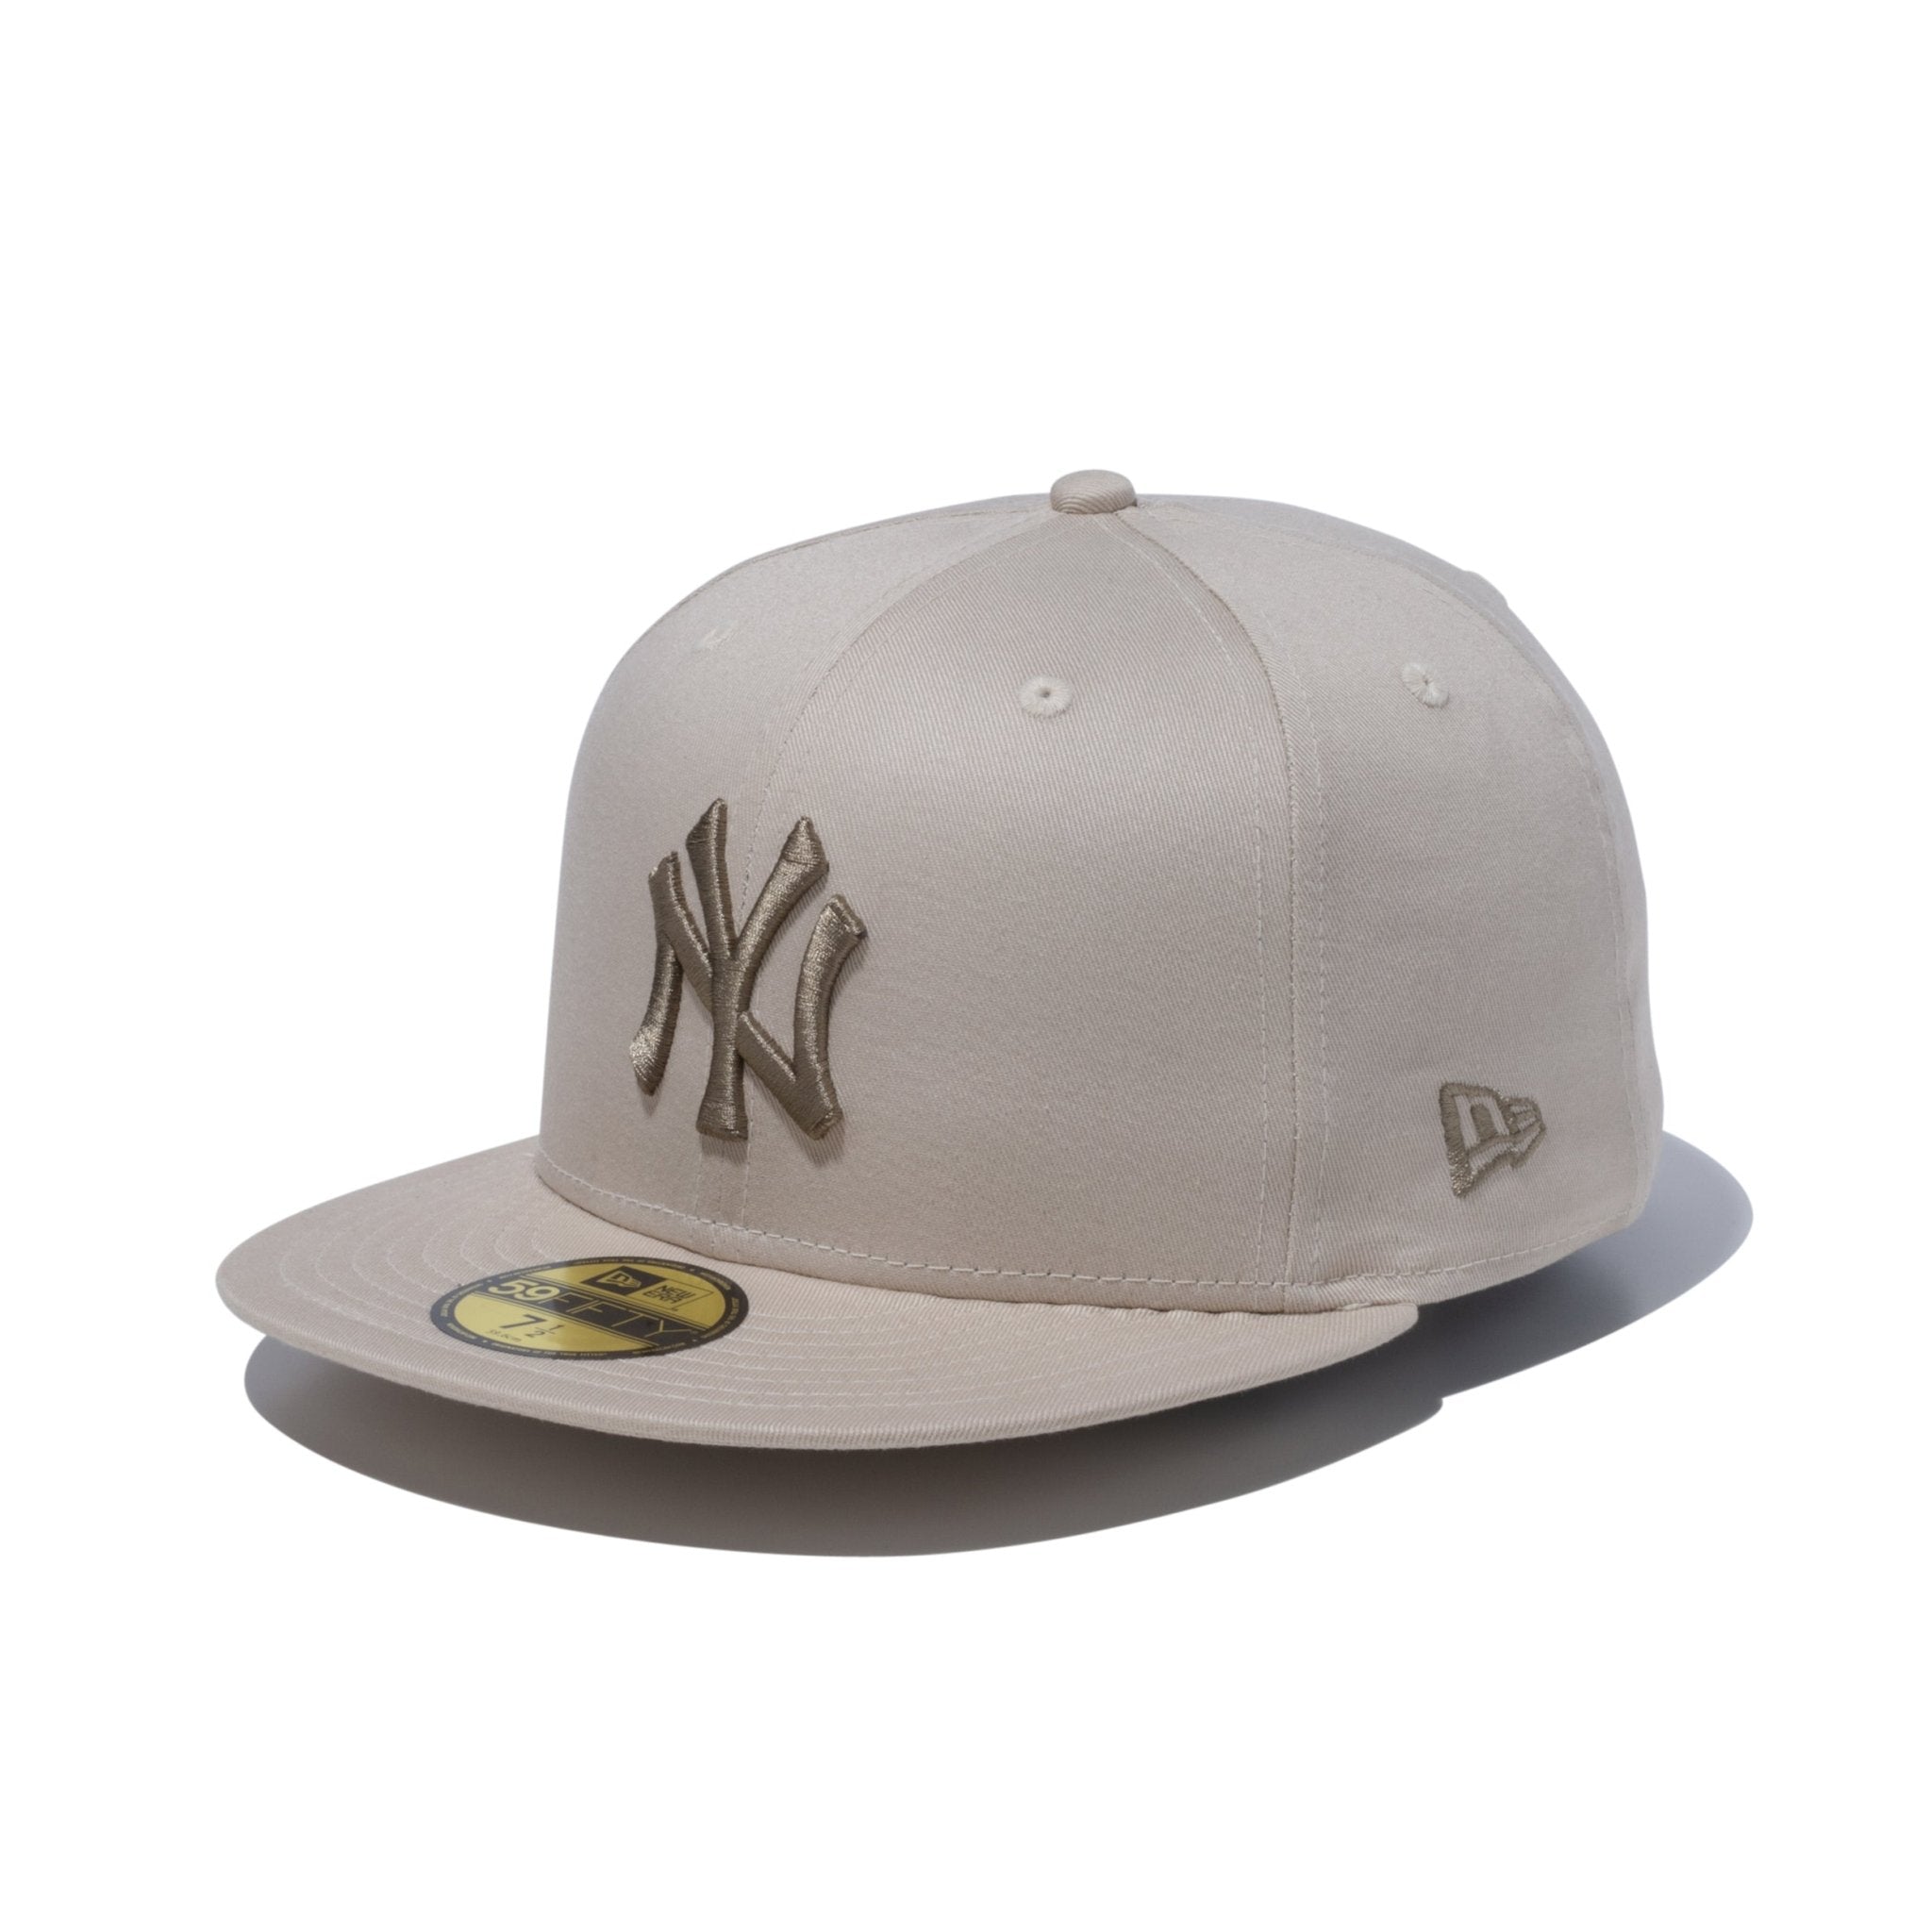 59FIFTY Nuance Color ニューヨーク・ヤンキース ライトベージュ 